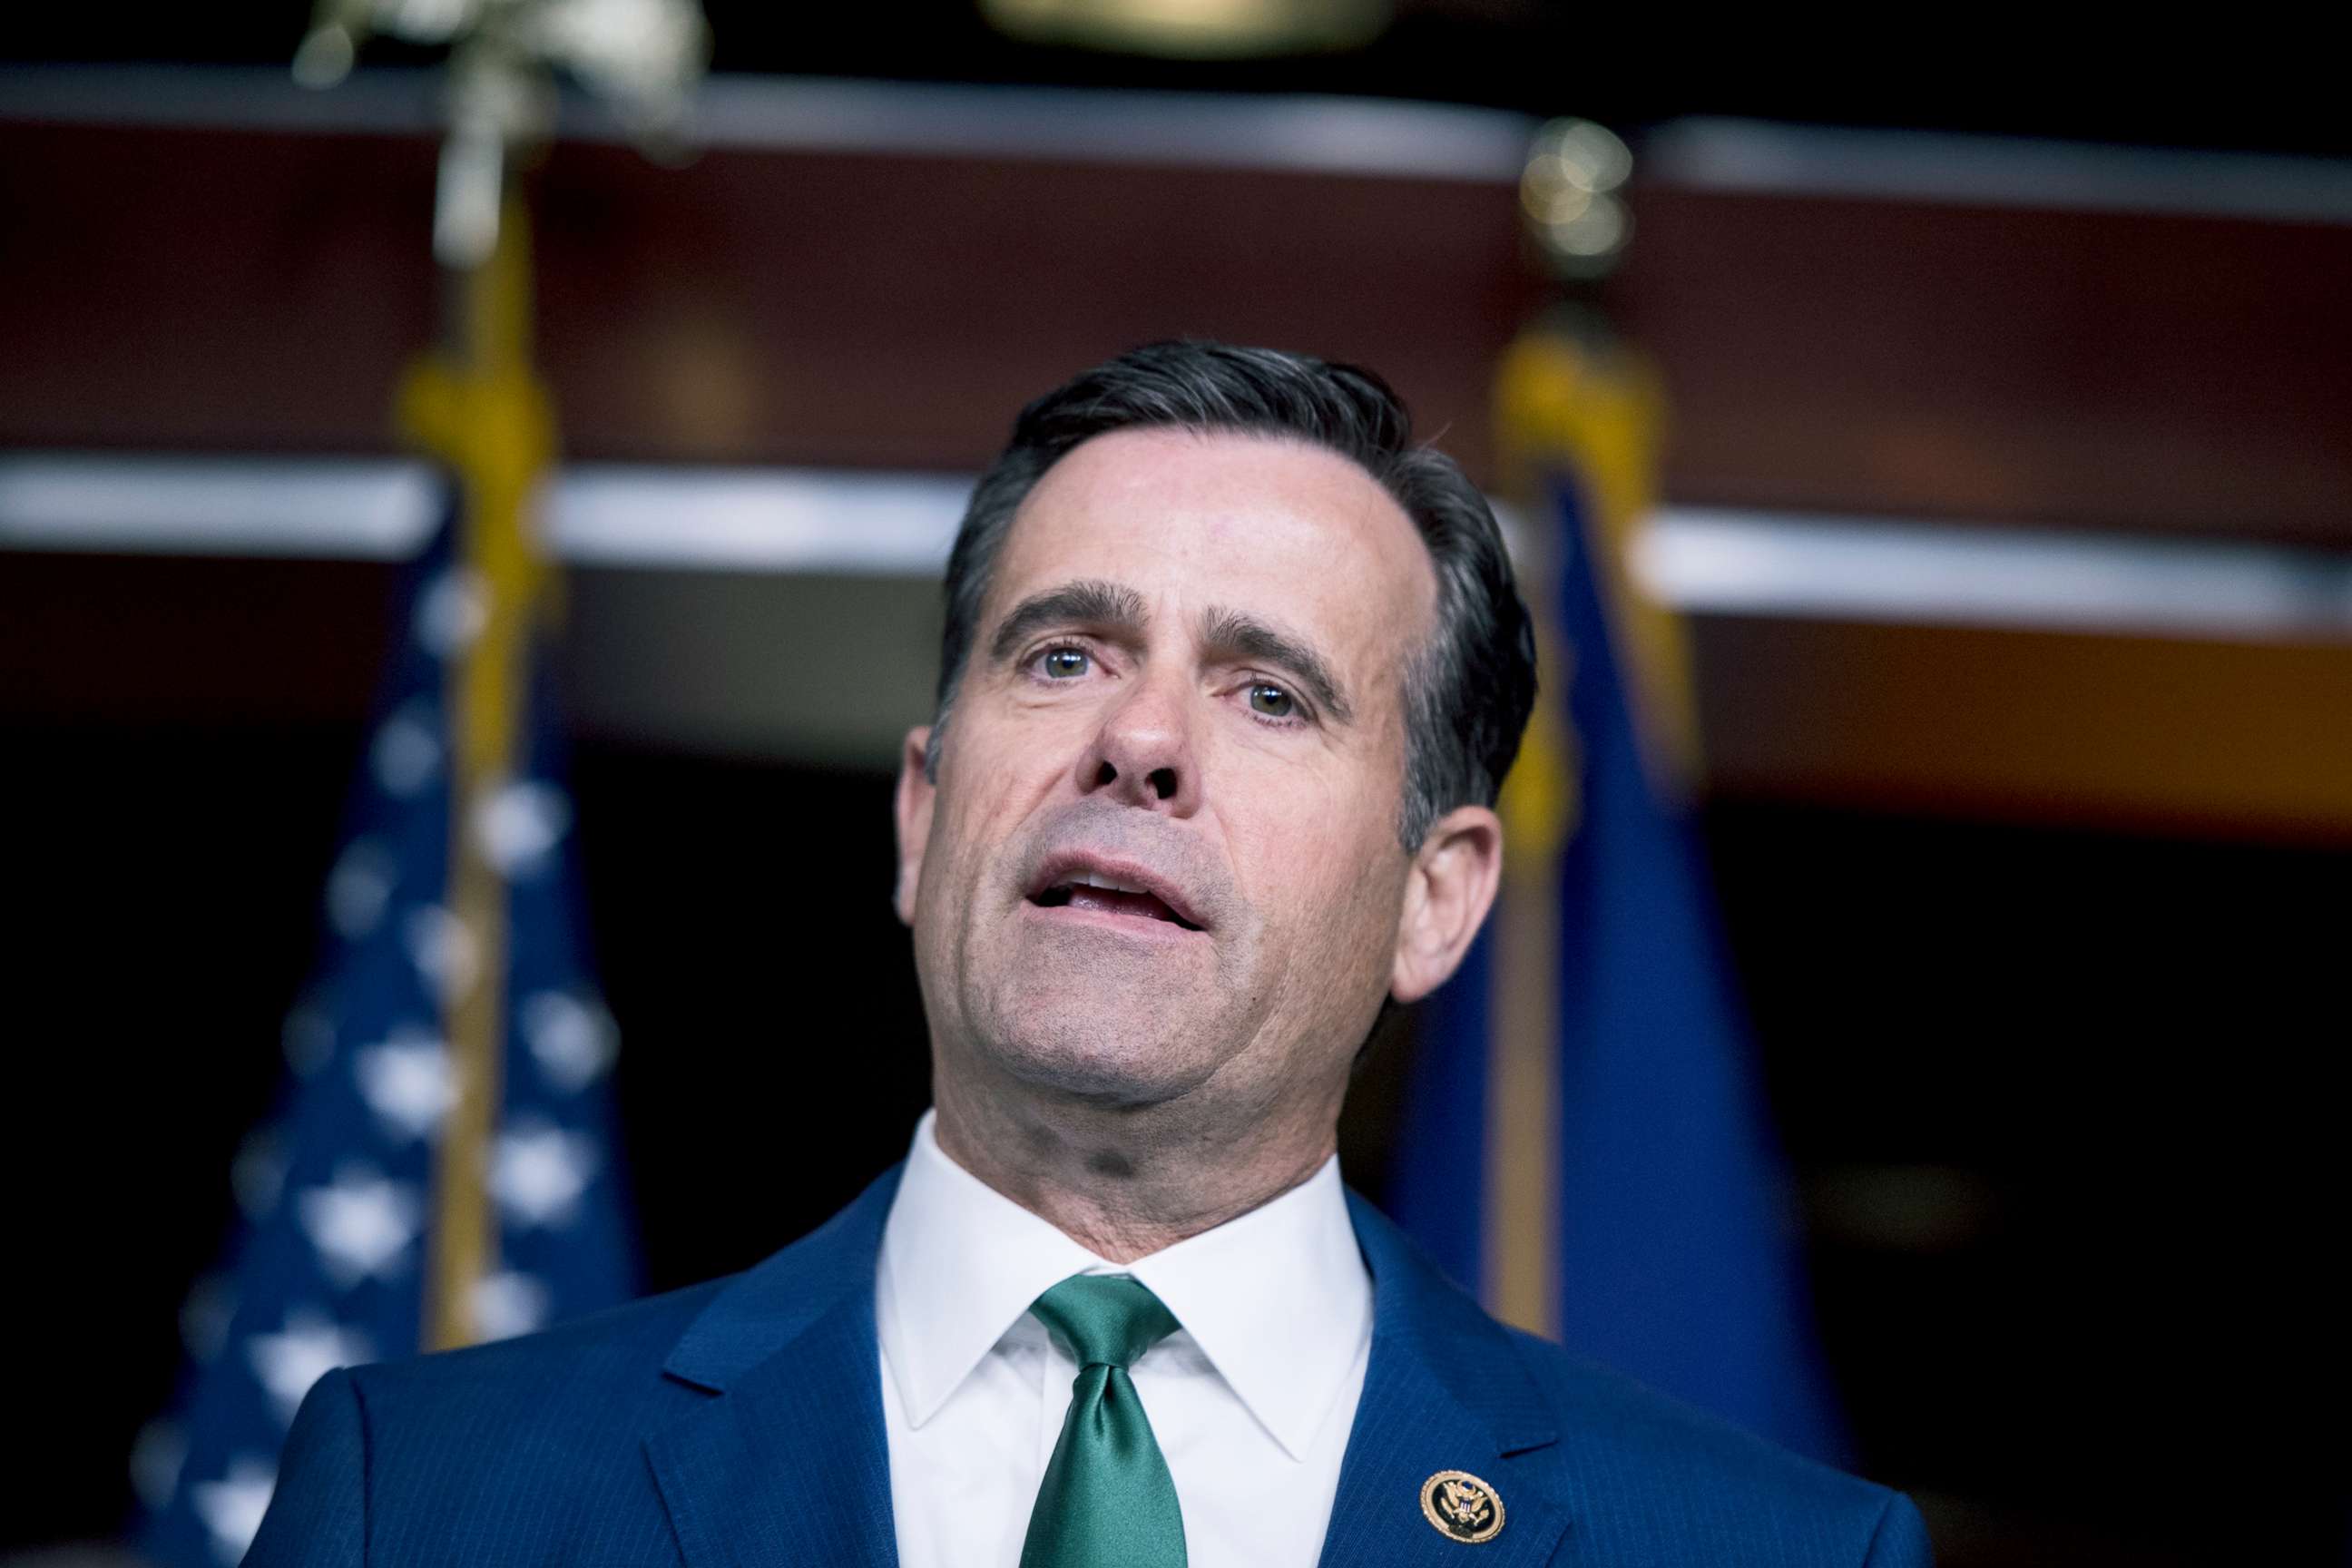 PHOTO: Rep. John Ratcliffe, R-Texas, speaks during the House GOP post-caucus press conference in the Capitol, March 26, 2019.